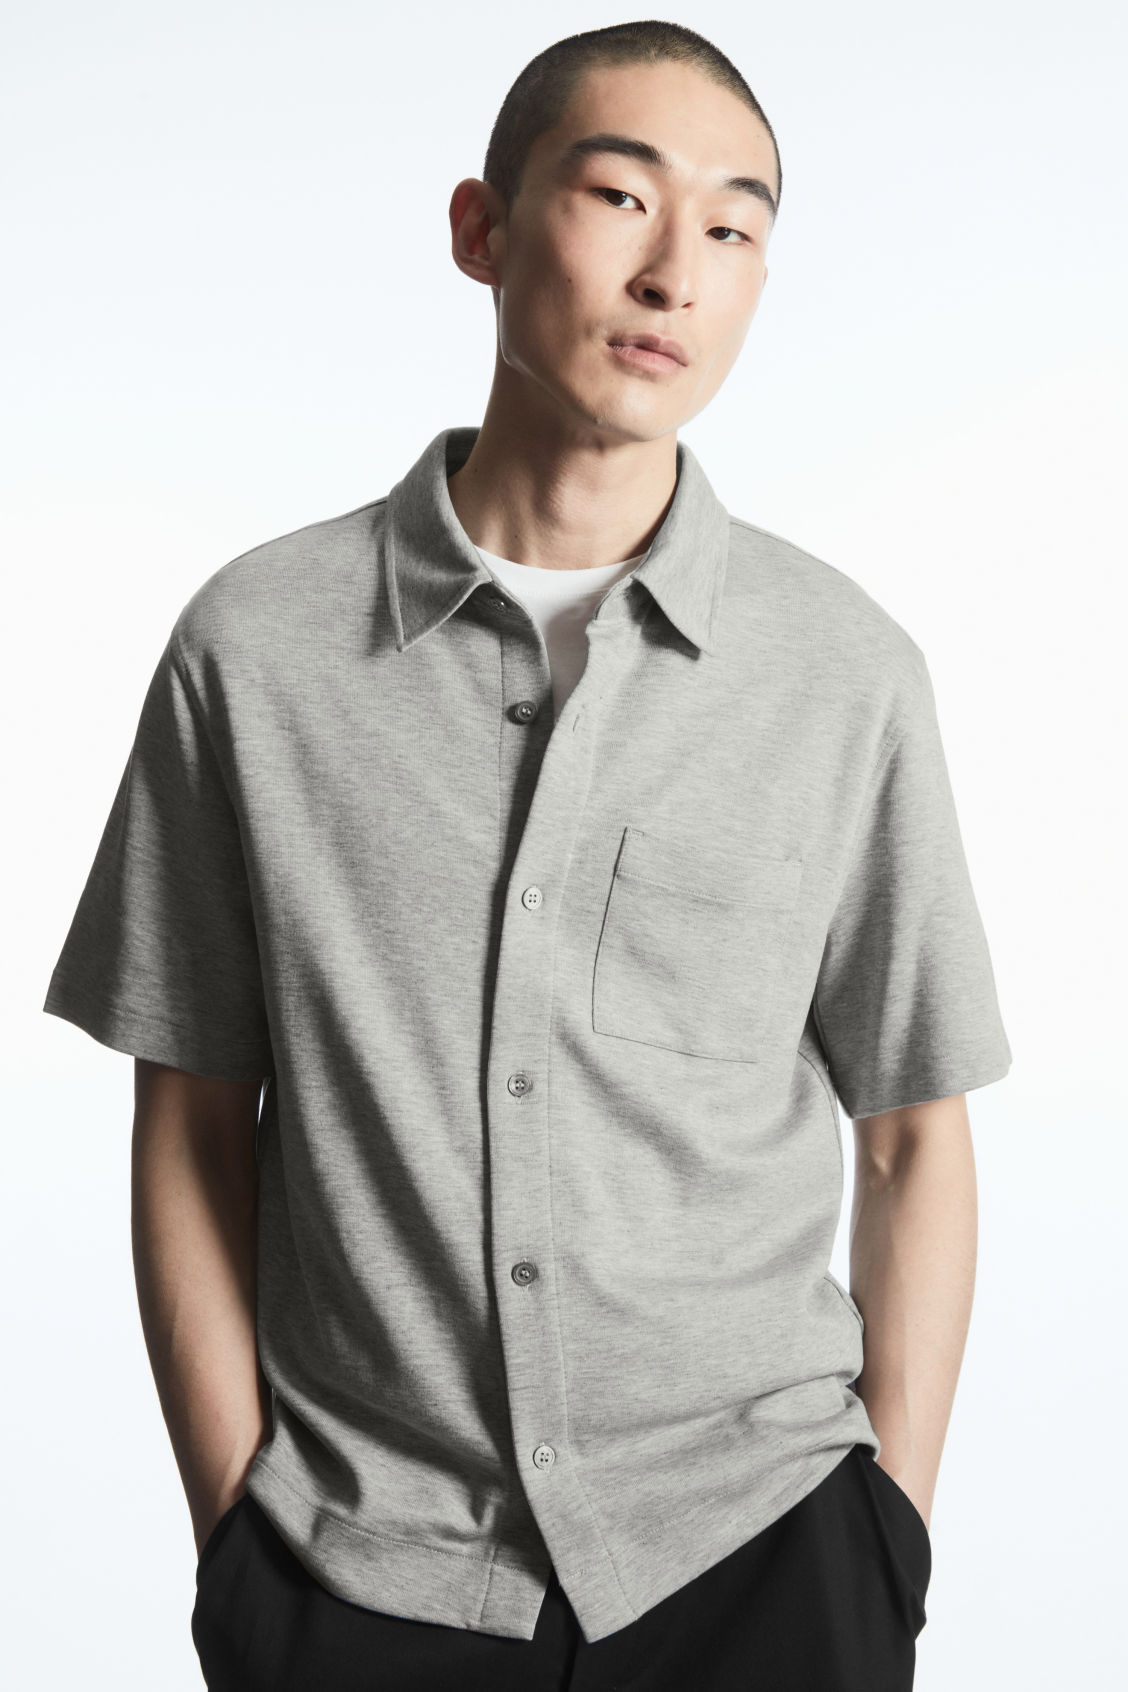 Short-Sleeved Jersey Shirt from COS